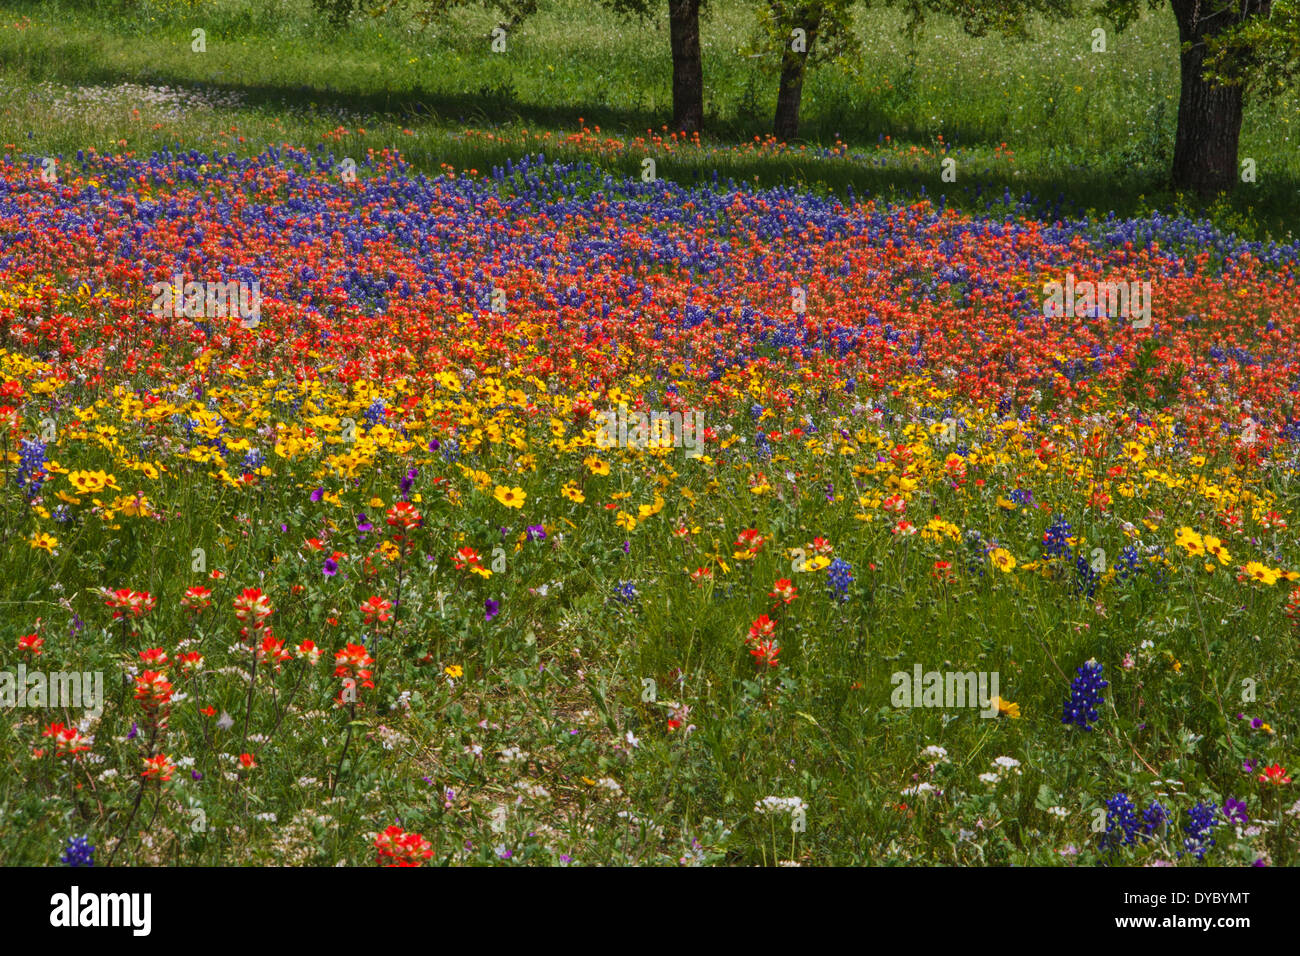 Fields of Texas Bluebonnets (Lupinus texensis), Indian Paintbrush (Castilleja indivisa), and Coreopsis wildflowers in Independence, Texas. Stock Photo